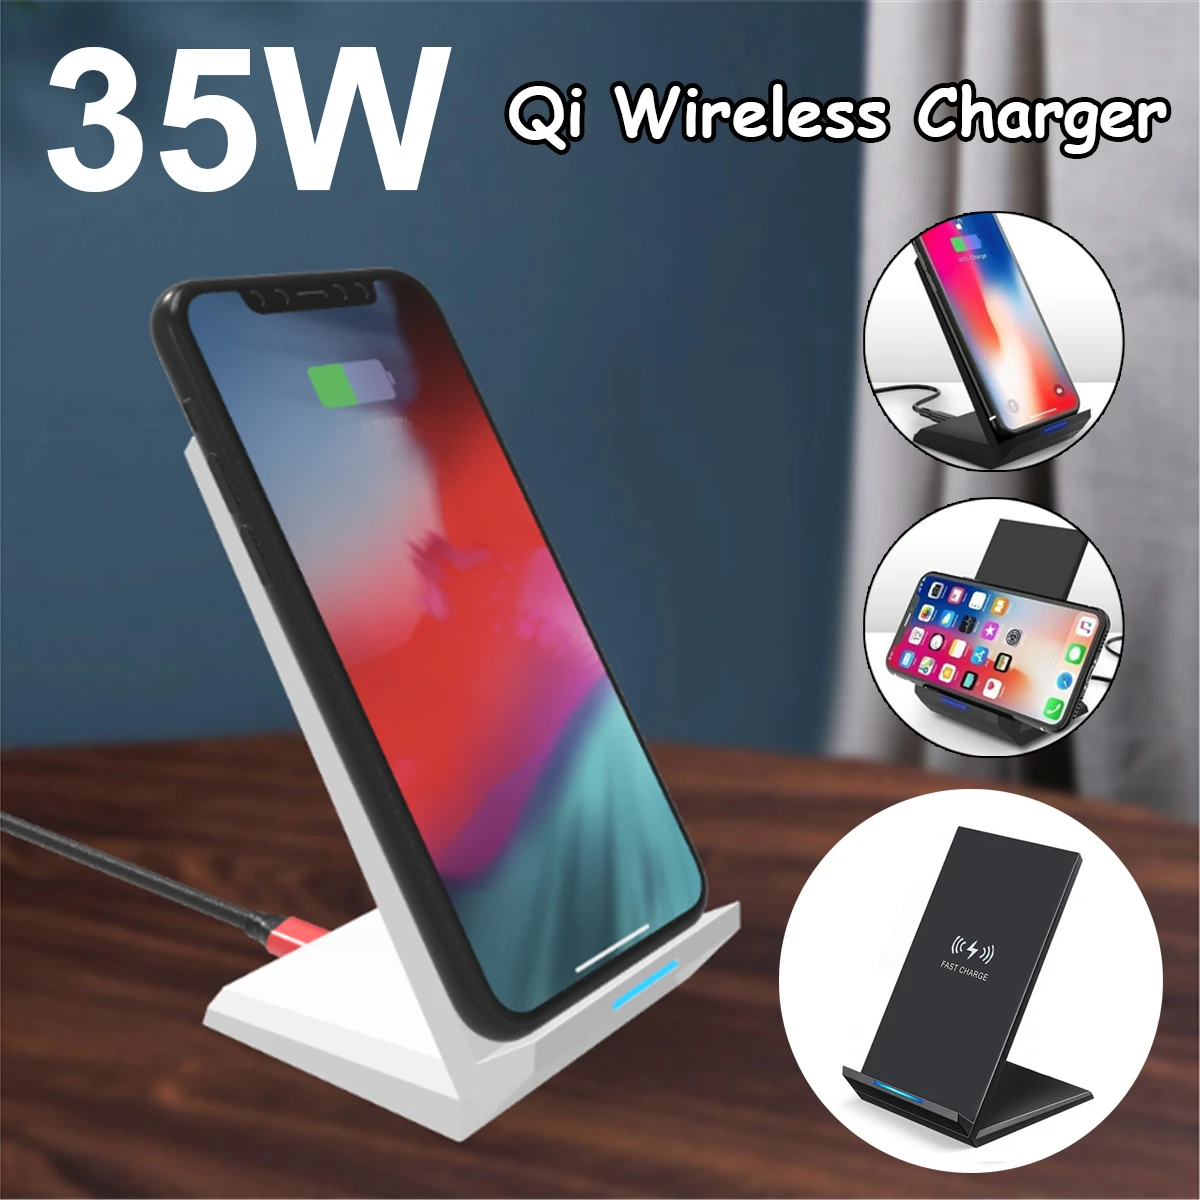 wireless chargers 35W Qi Wireless Charger Stand For iPhone X XS MAX XR 11 Pro 8 Samsungs S20 S10 S9 Fast Charging Dock Station Phone Charger samsung charging station